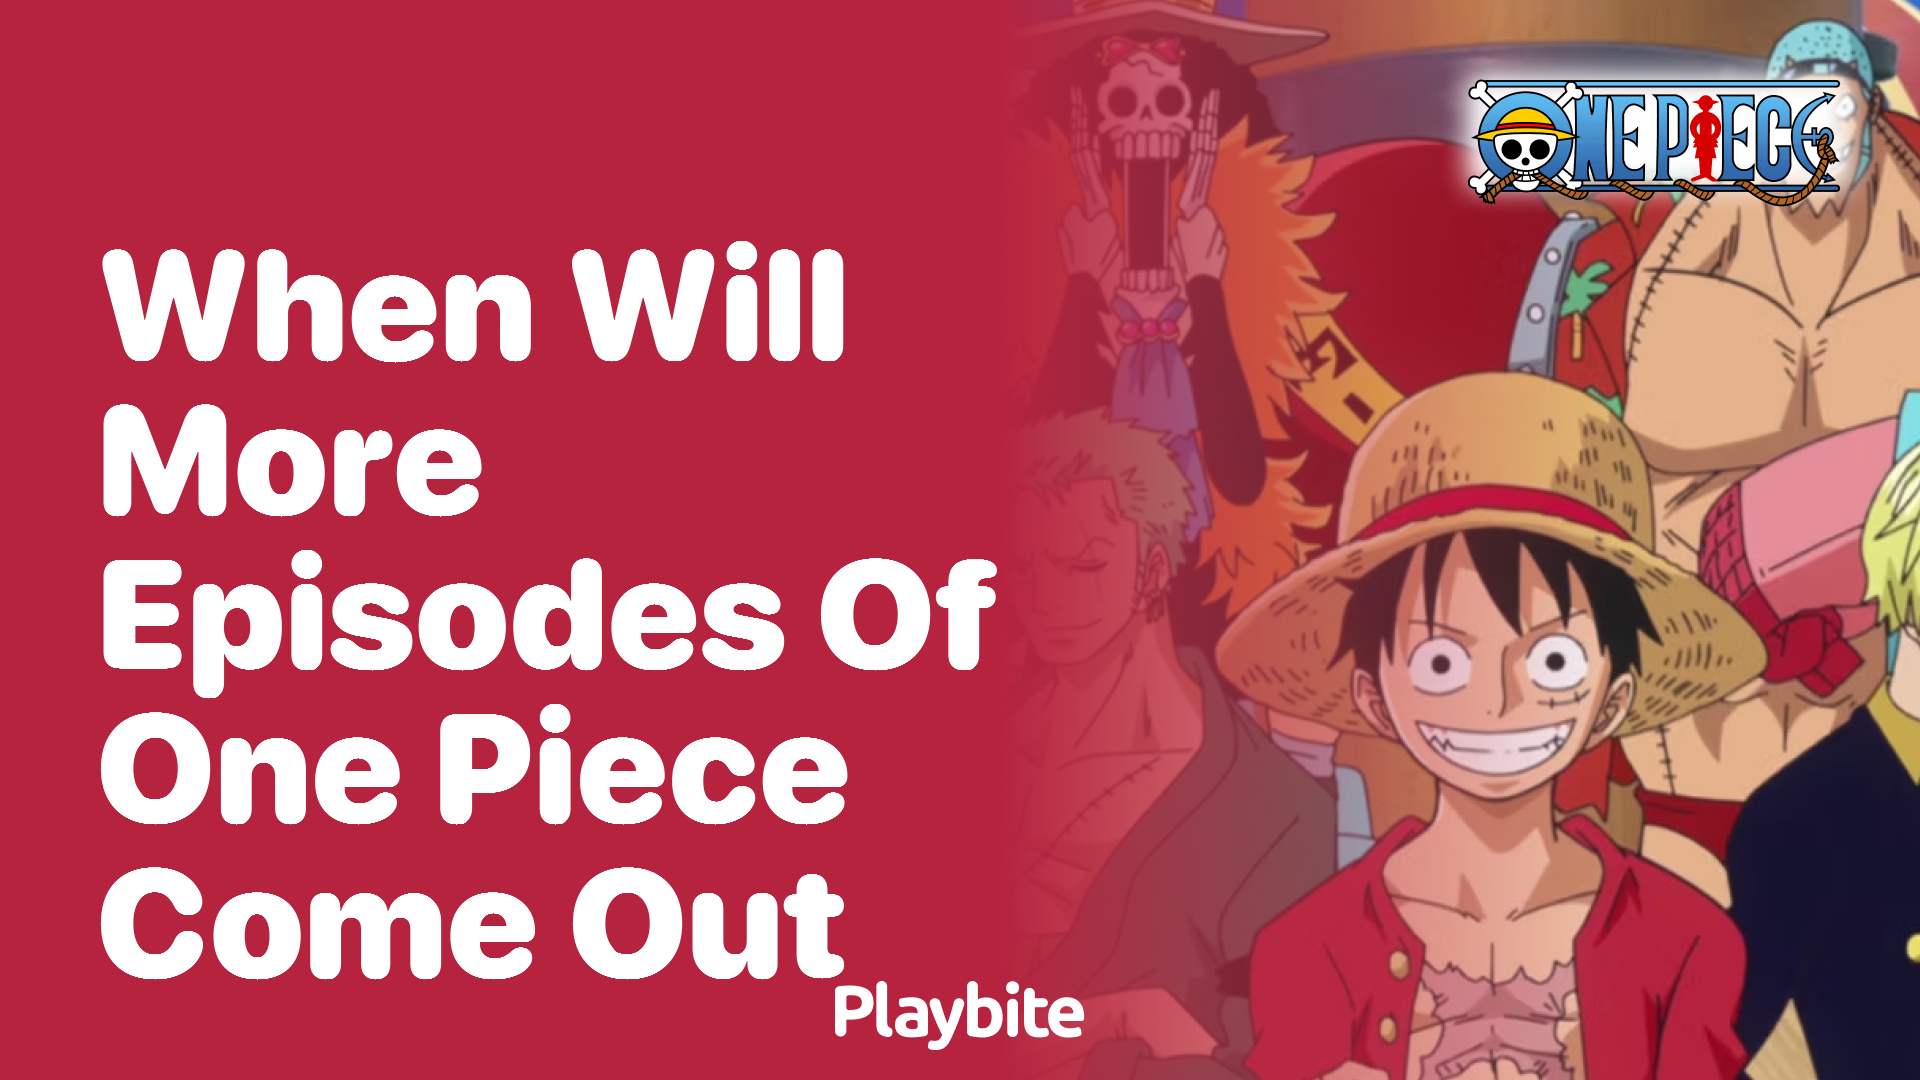 When will more episodes of One Piece come out?